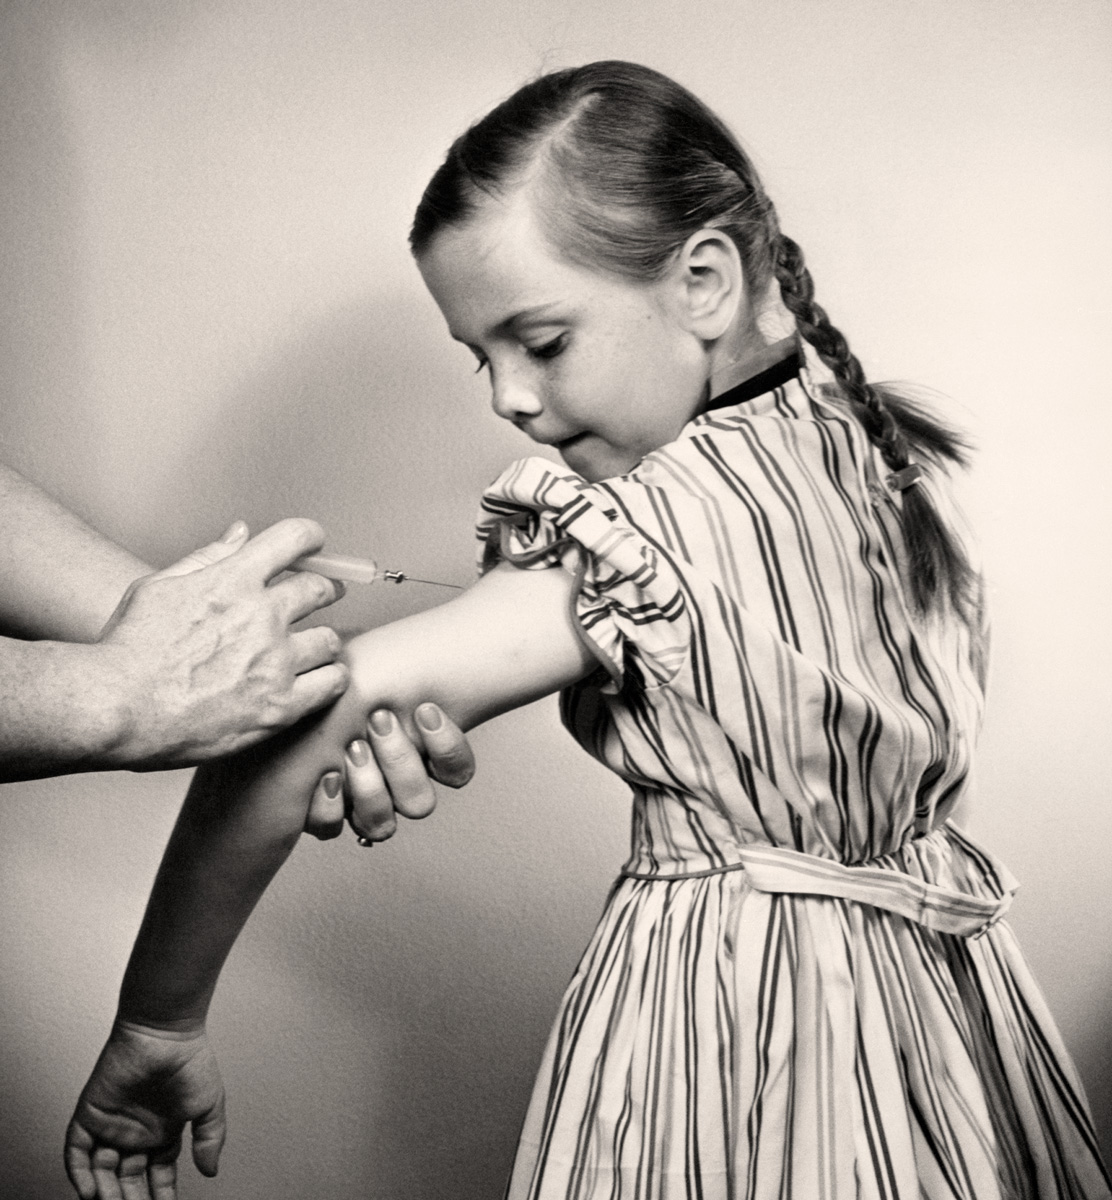 The Long History of America's Anti-Vaccination Movement